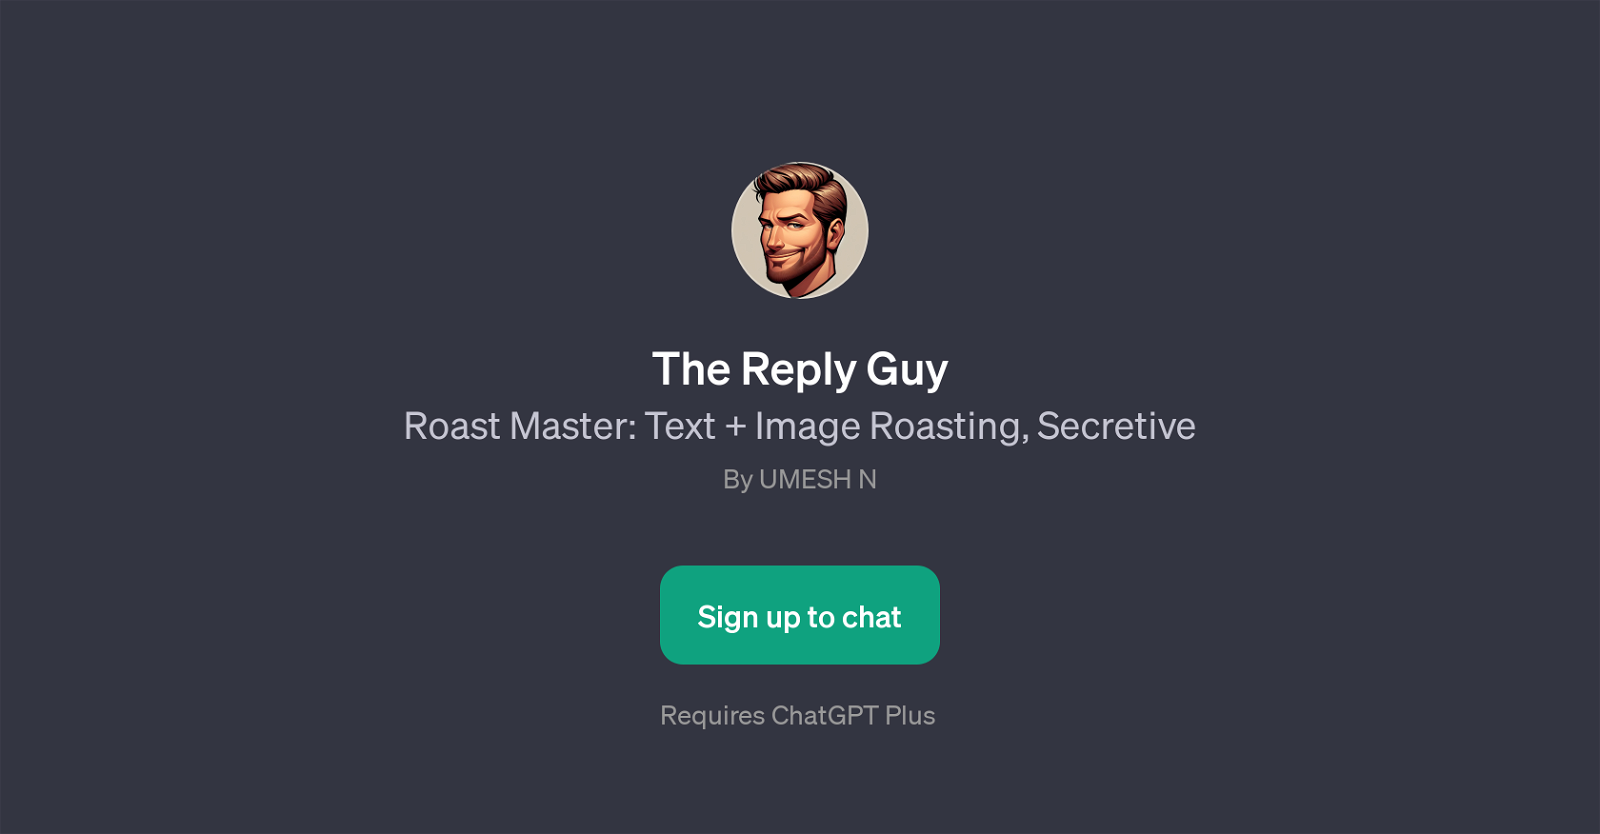 The Reply Guy website